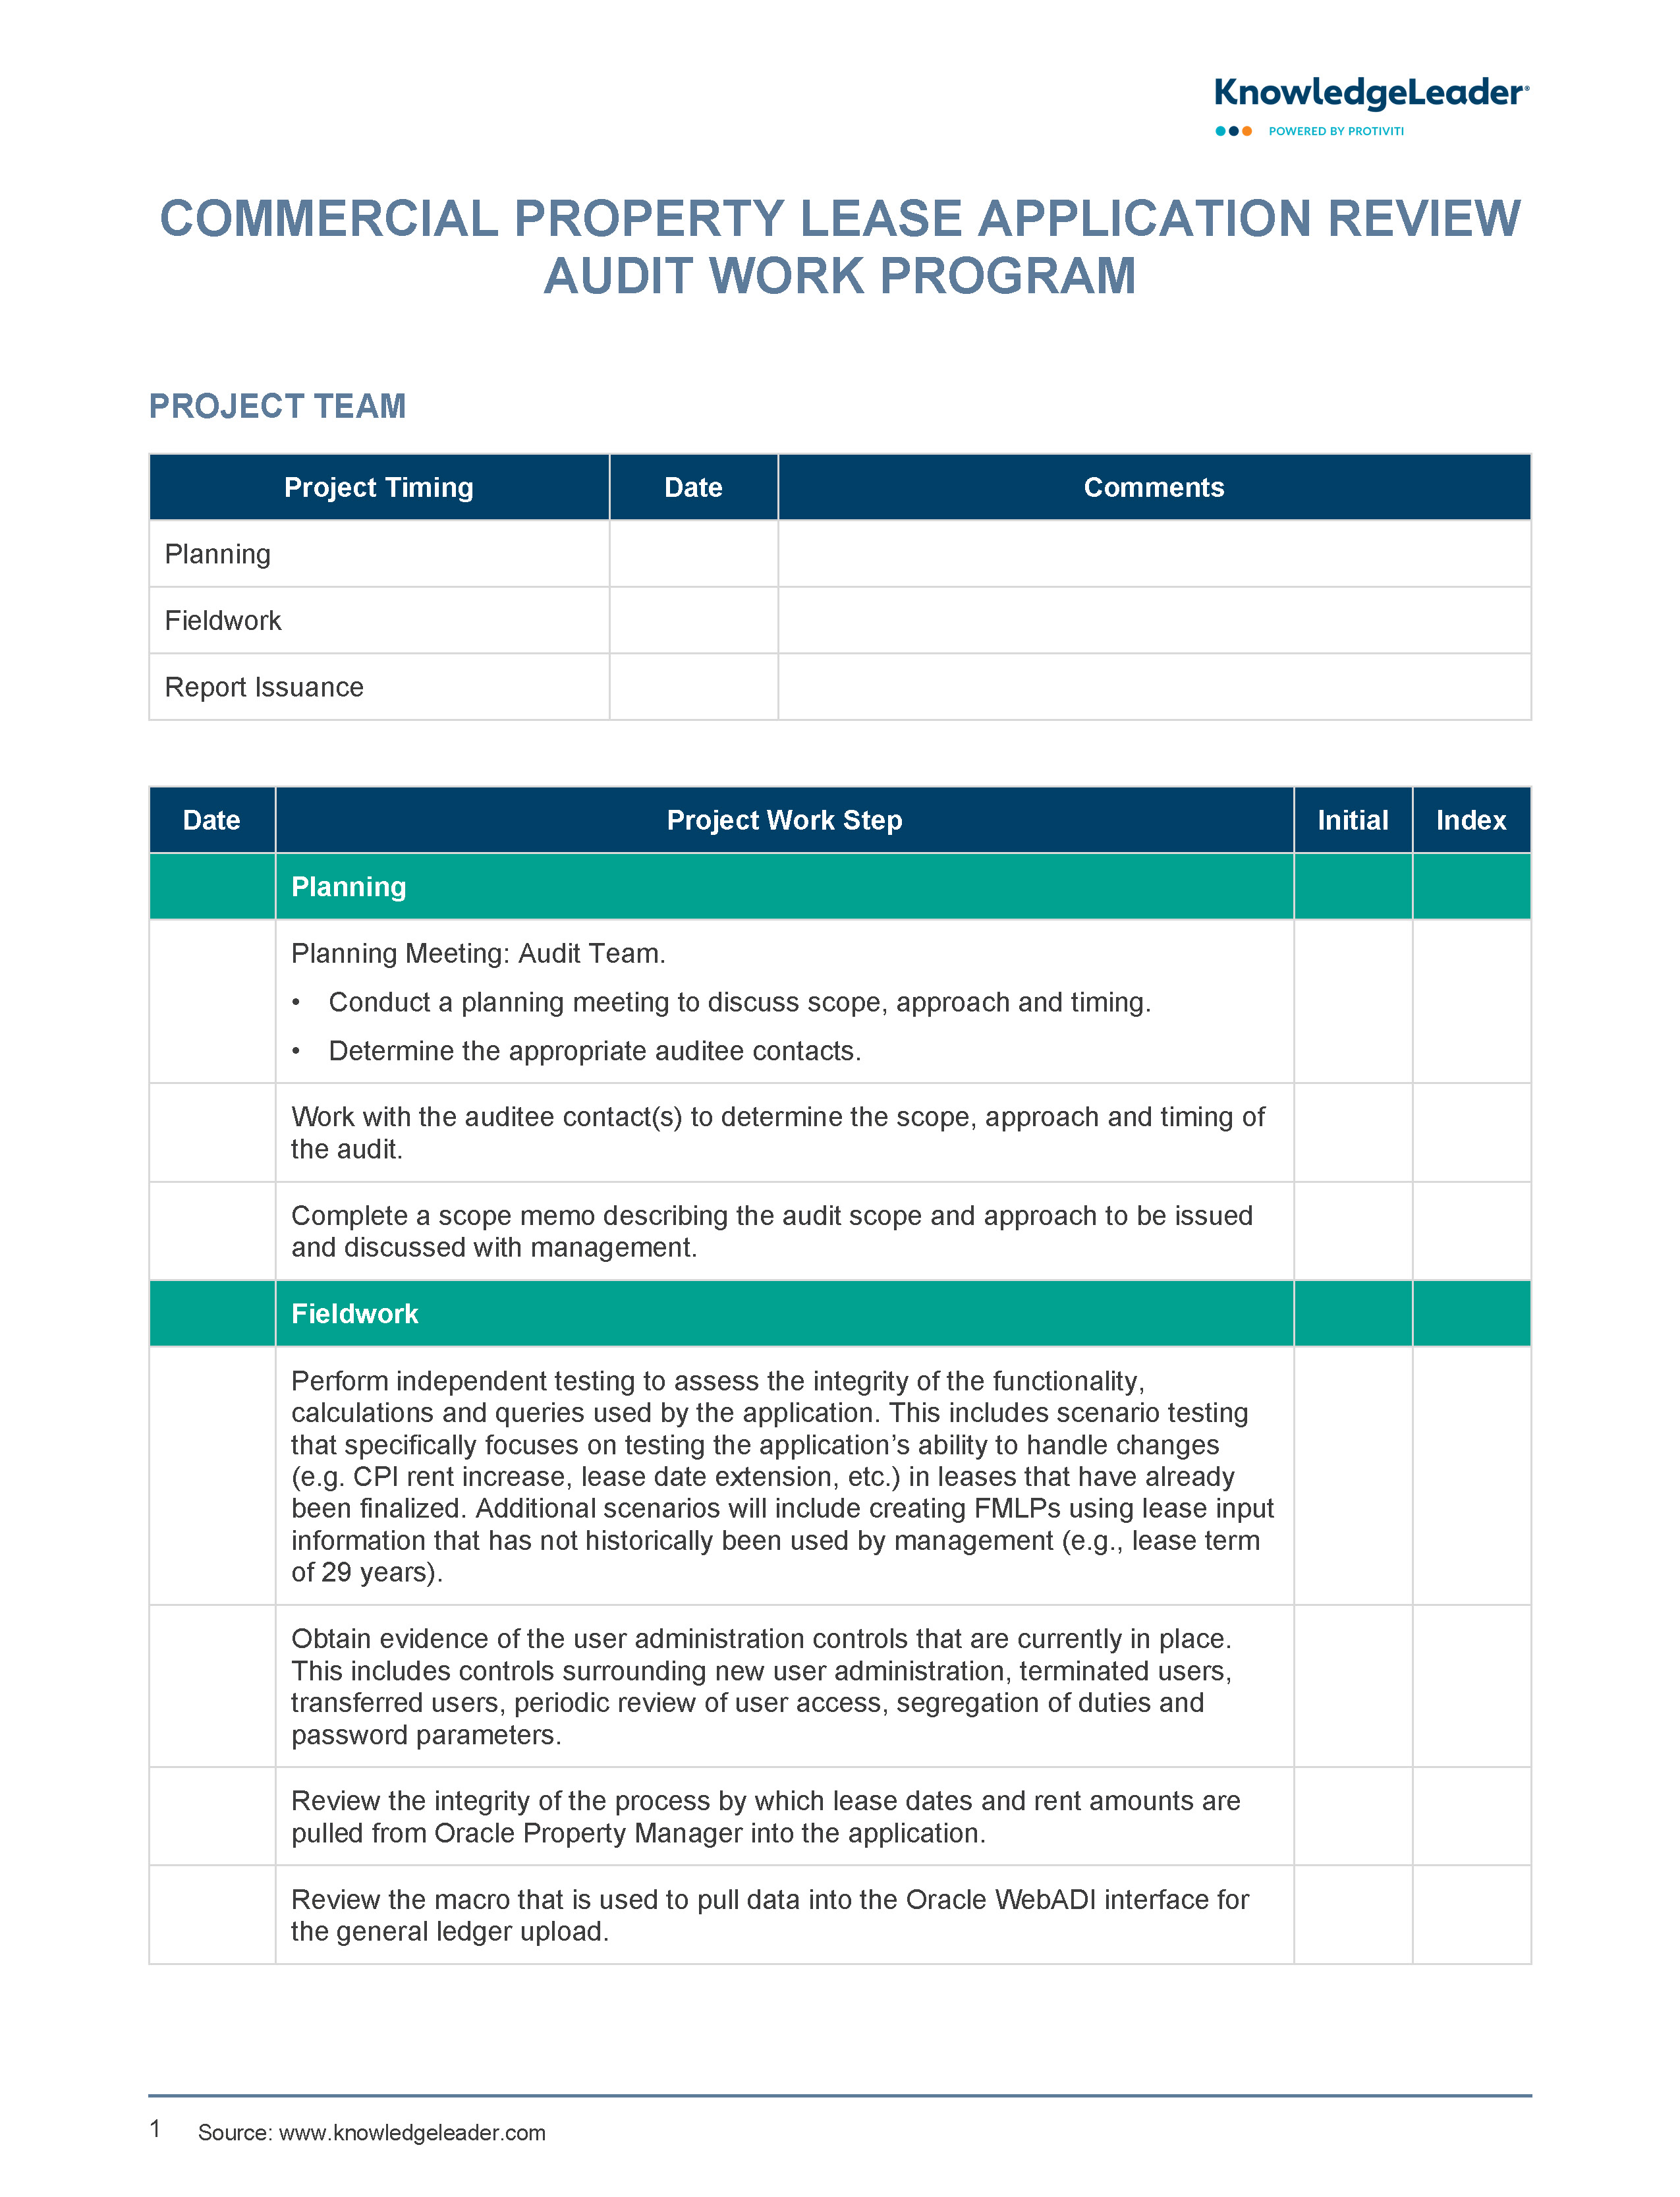 Screenshot of the first page of Commercial Property Lease Application Audit Work Program